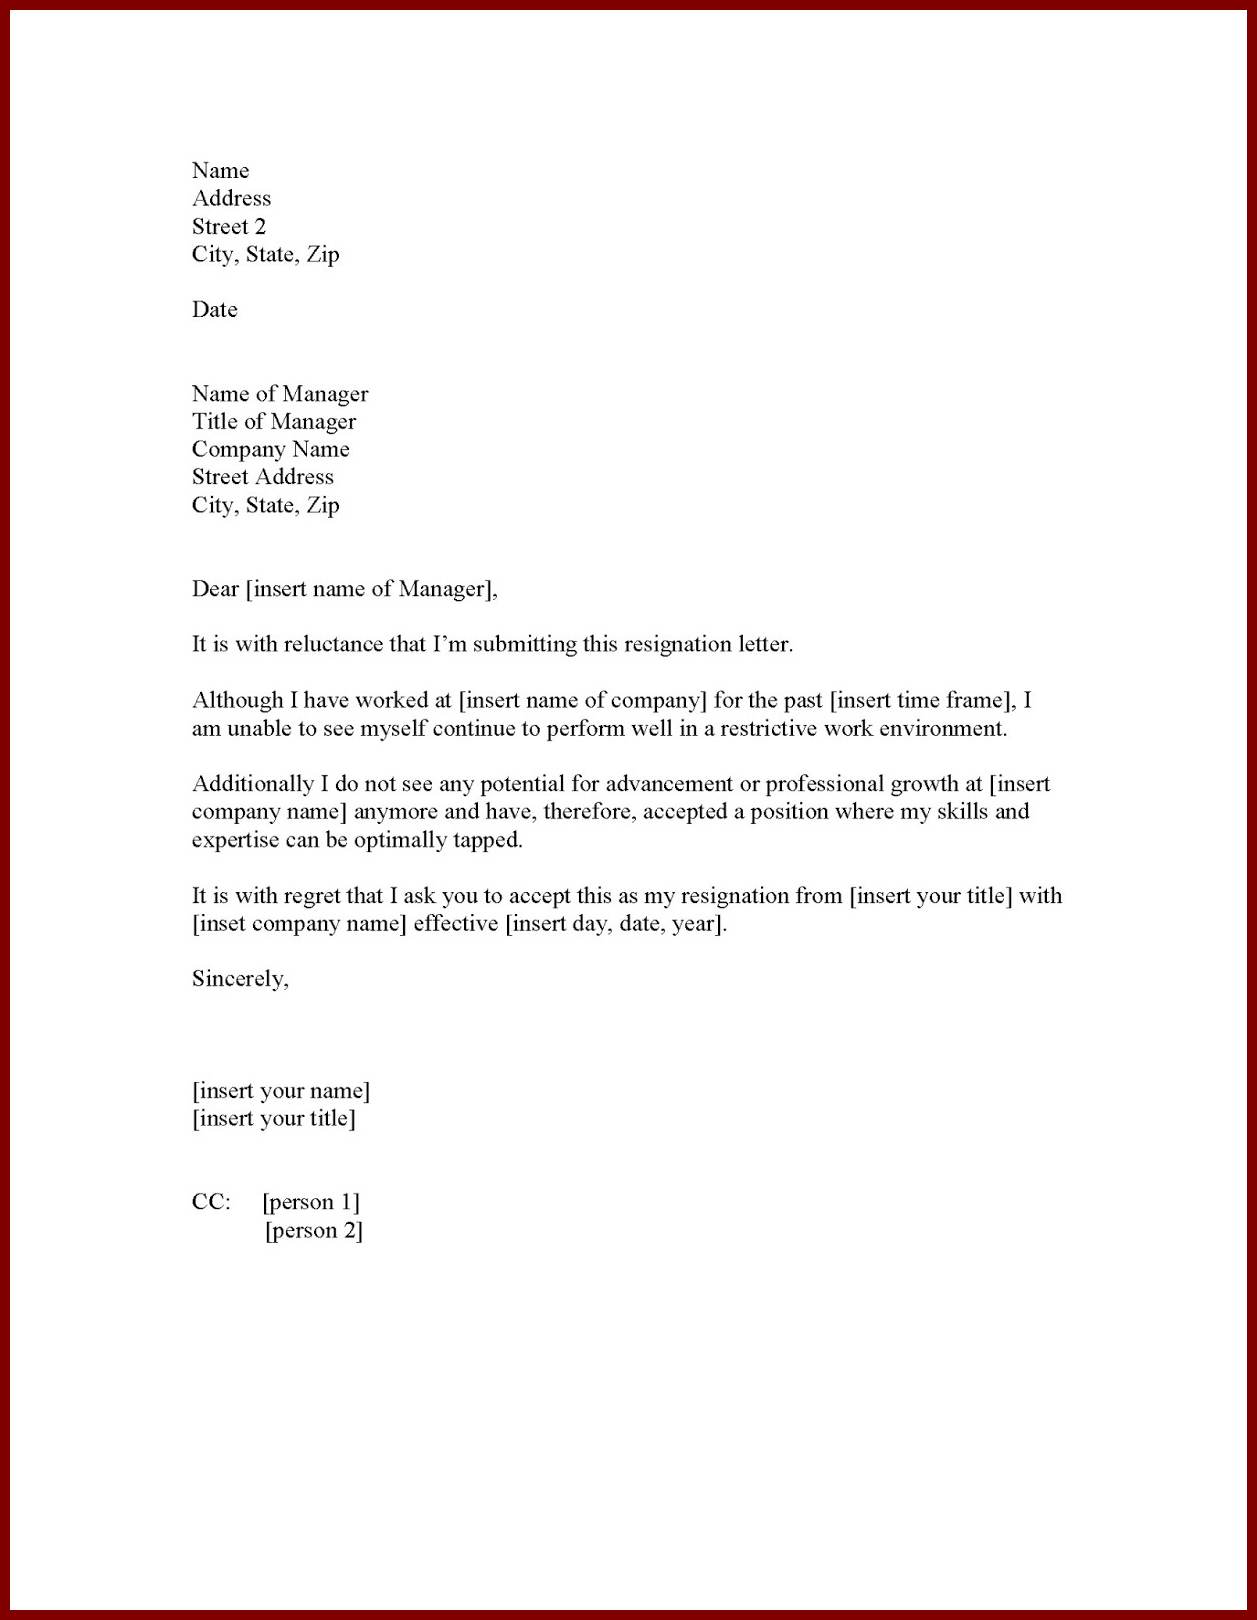 Letter : One Month Notice Period Resignation Letter 